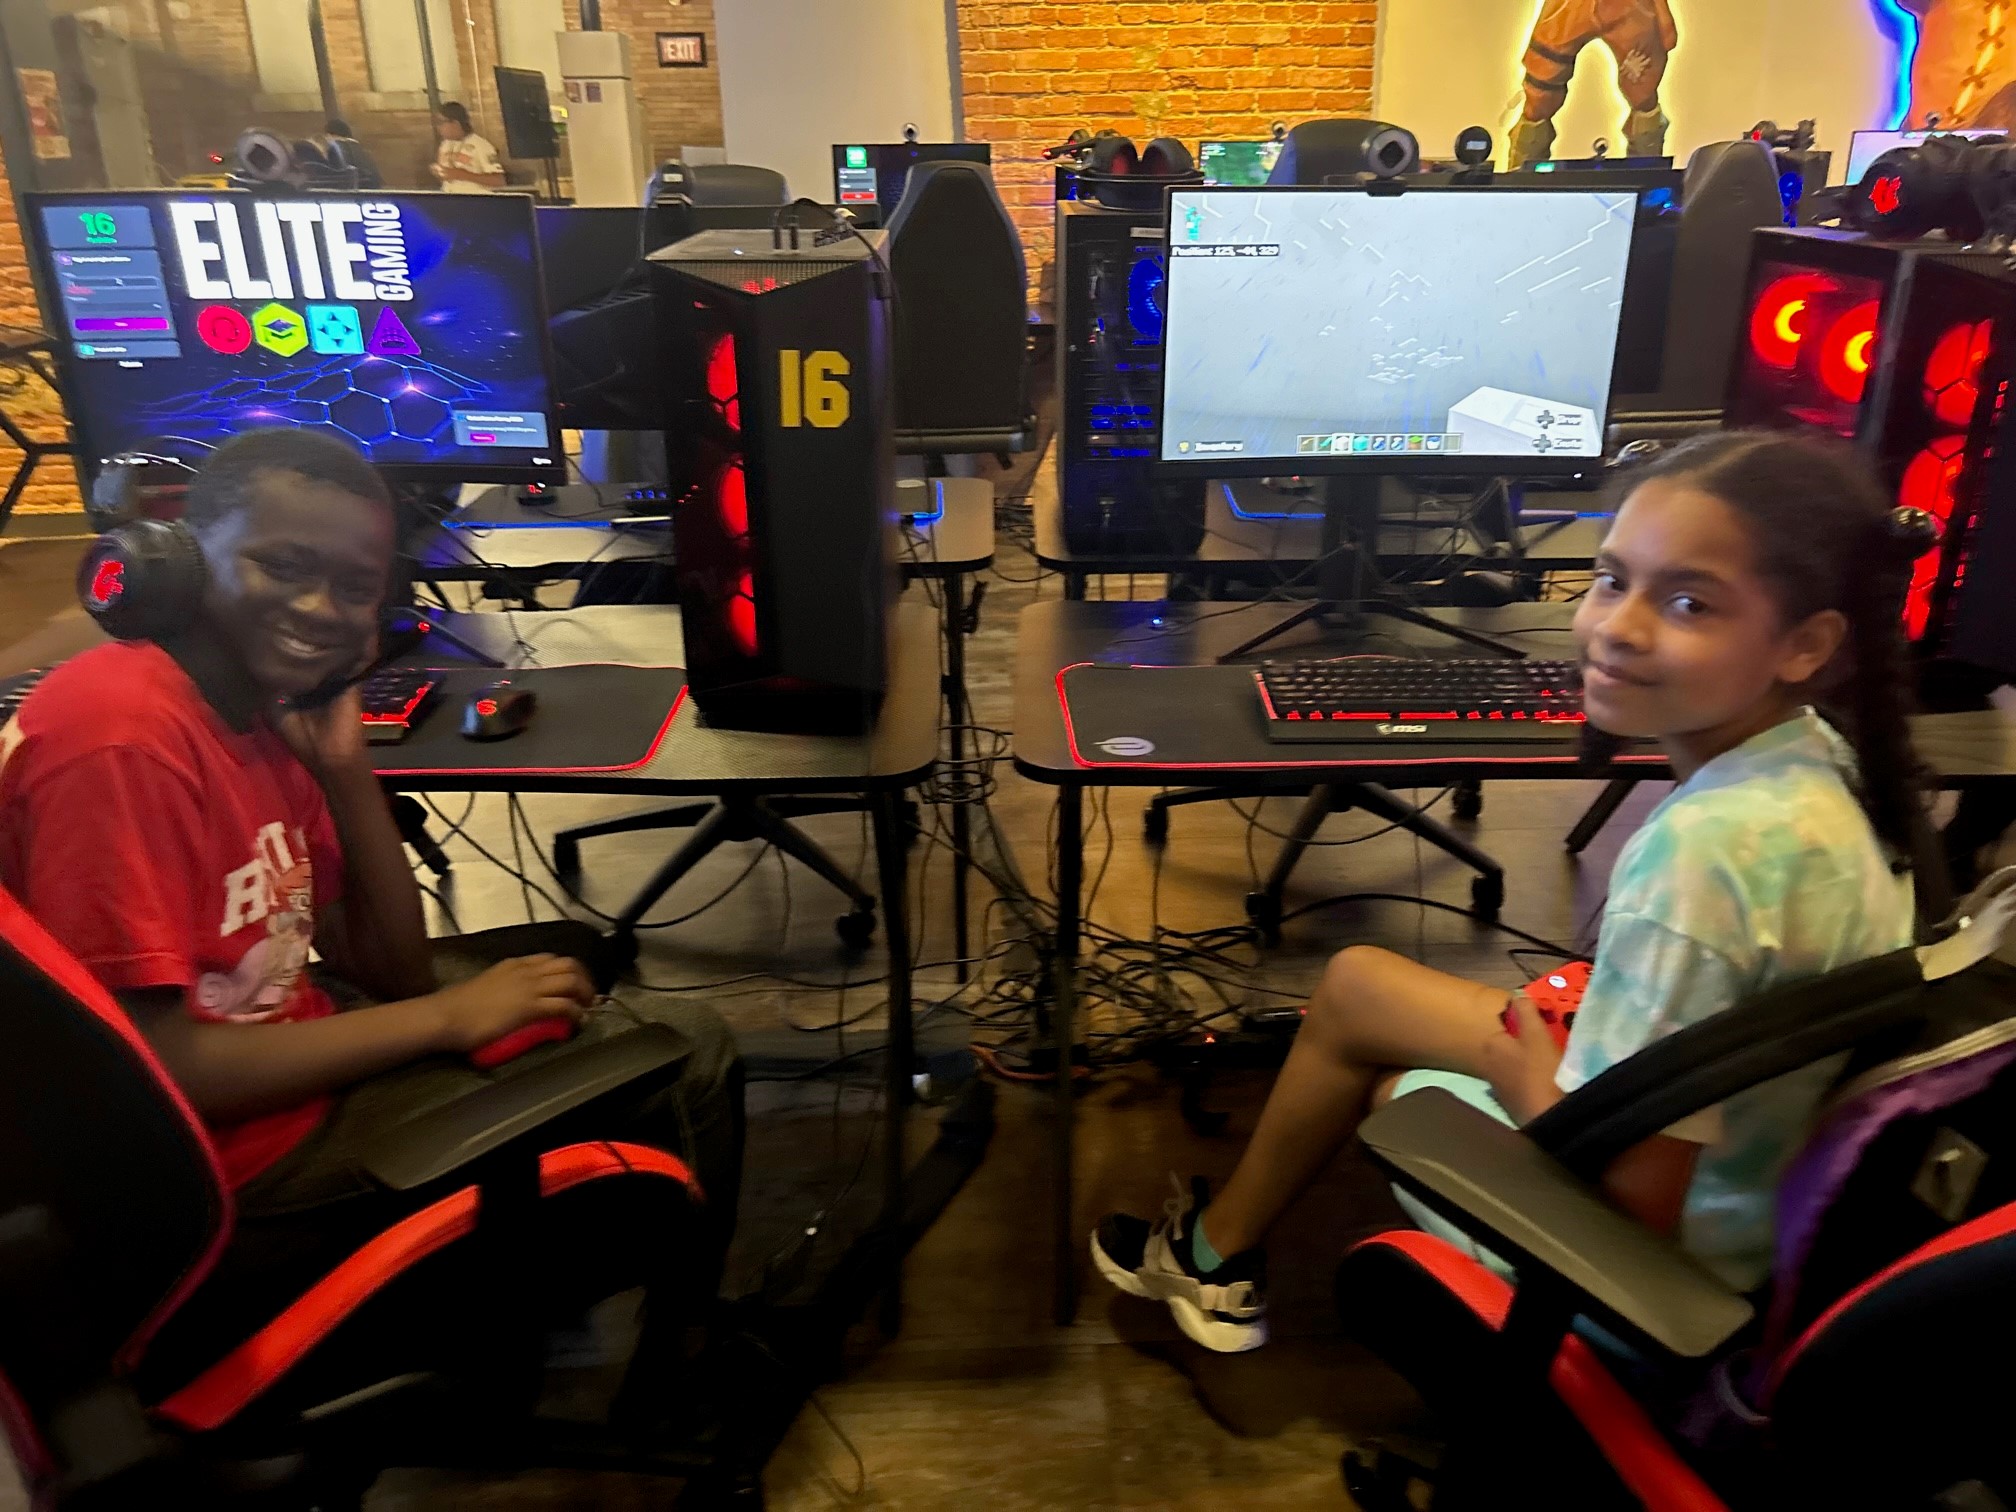 This is a photo of two students, each sitting at a computer gaming center and smiling at the camera.